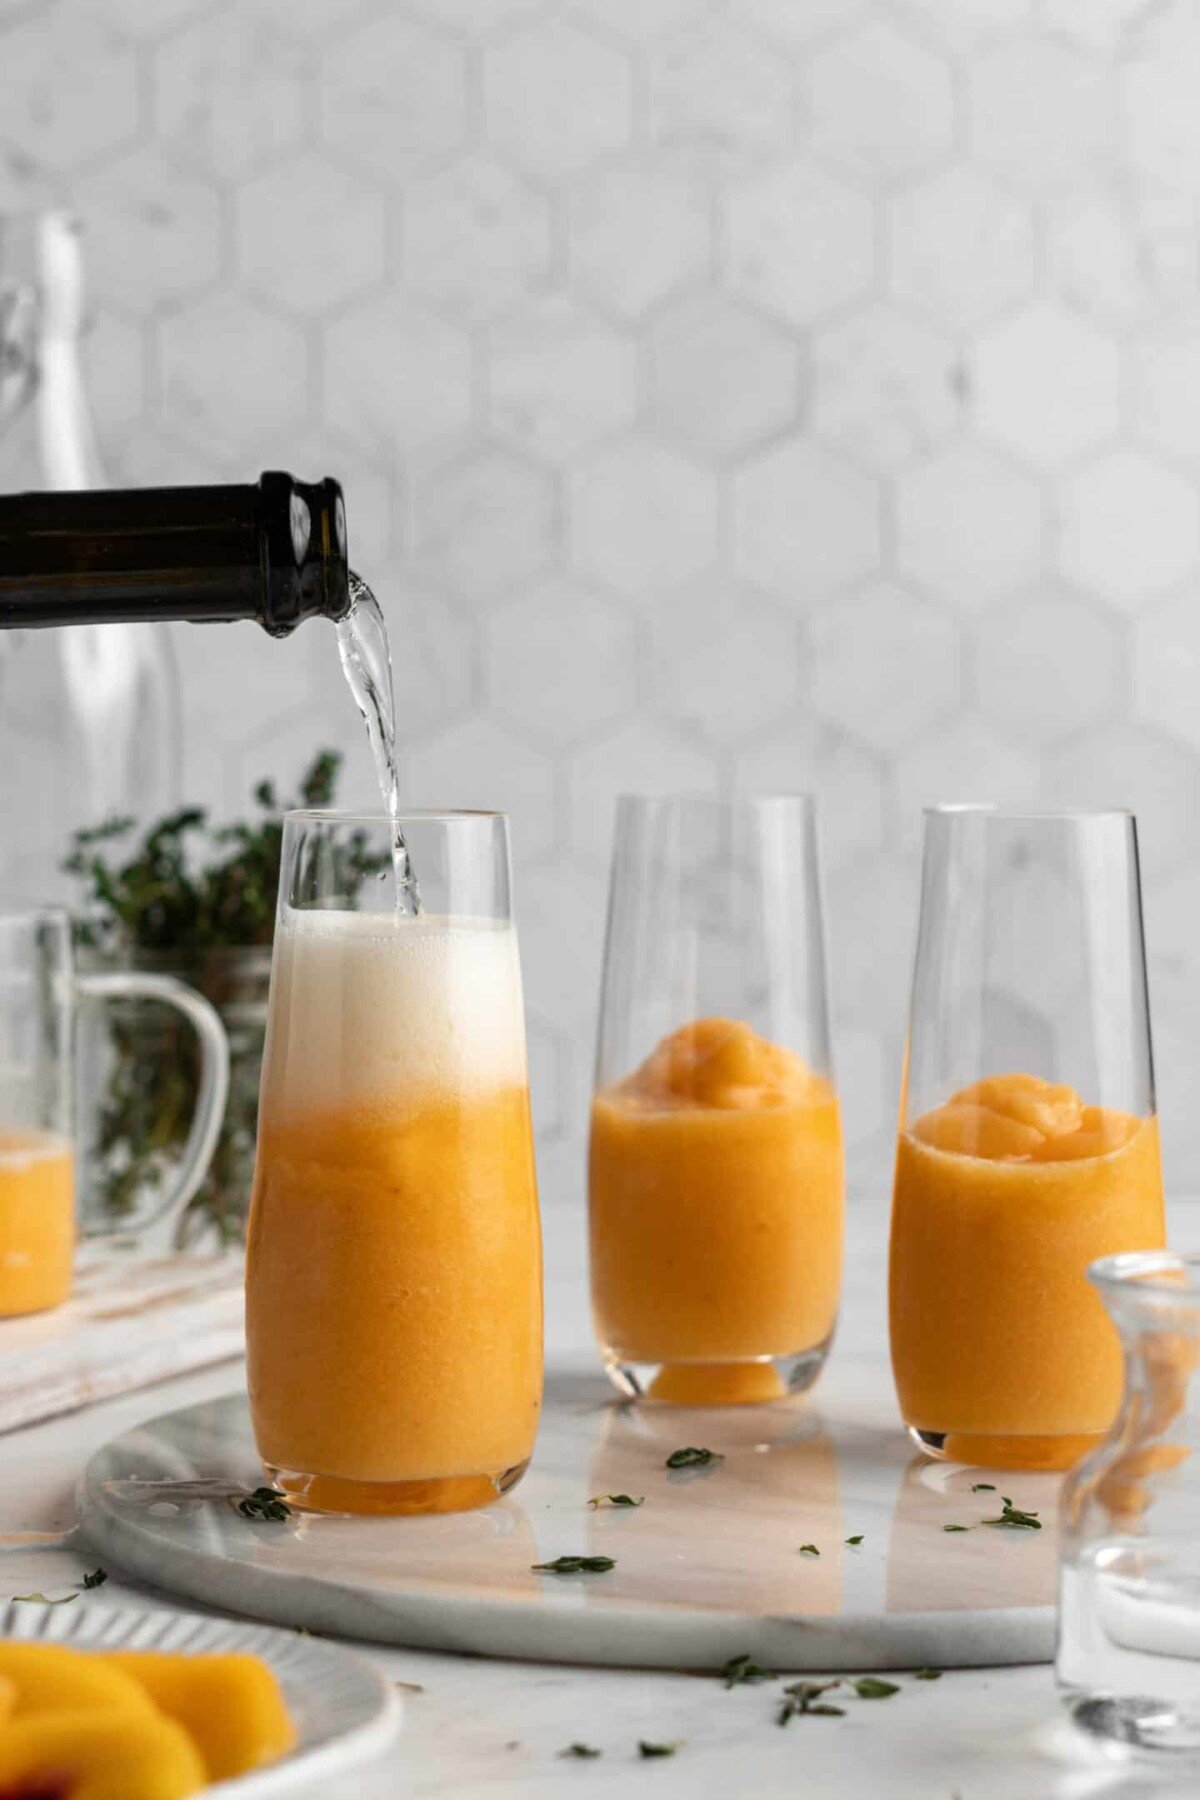 A glass filled halfway with peach puree with a bottle of sparkling wine being poured into it, with two glasses of peach puree in the background